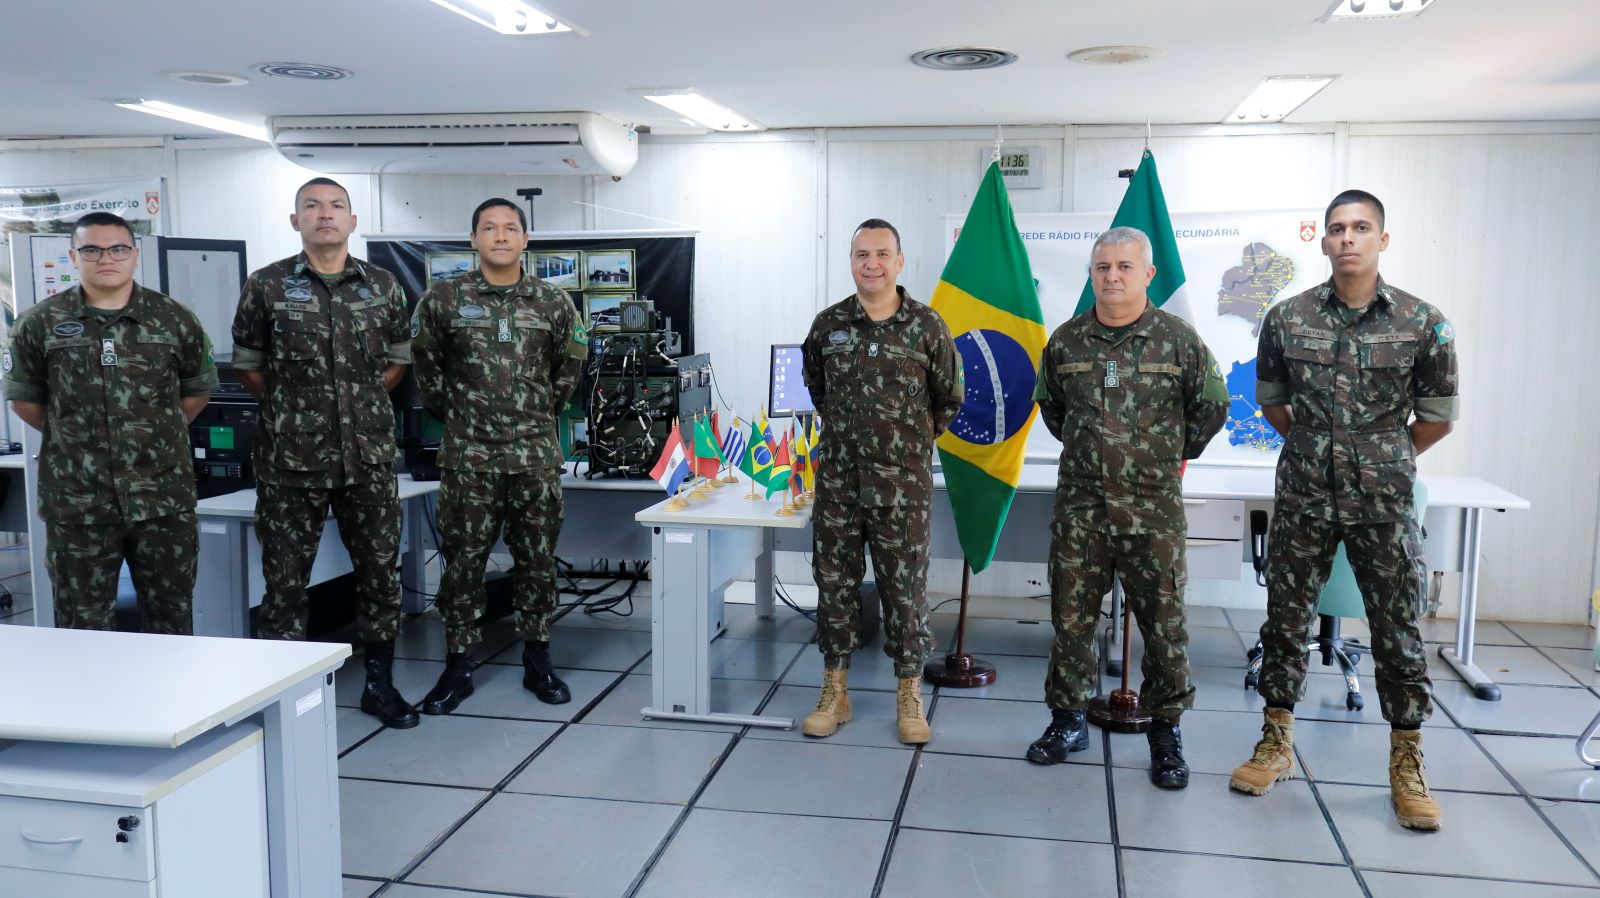 Brazilian army takes part in exercise at the Conference of American Armies